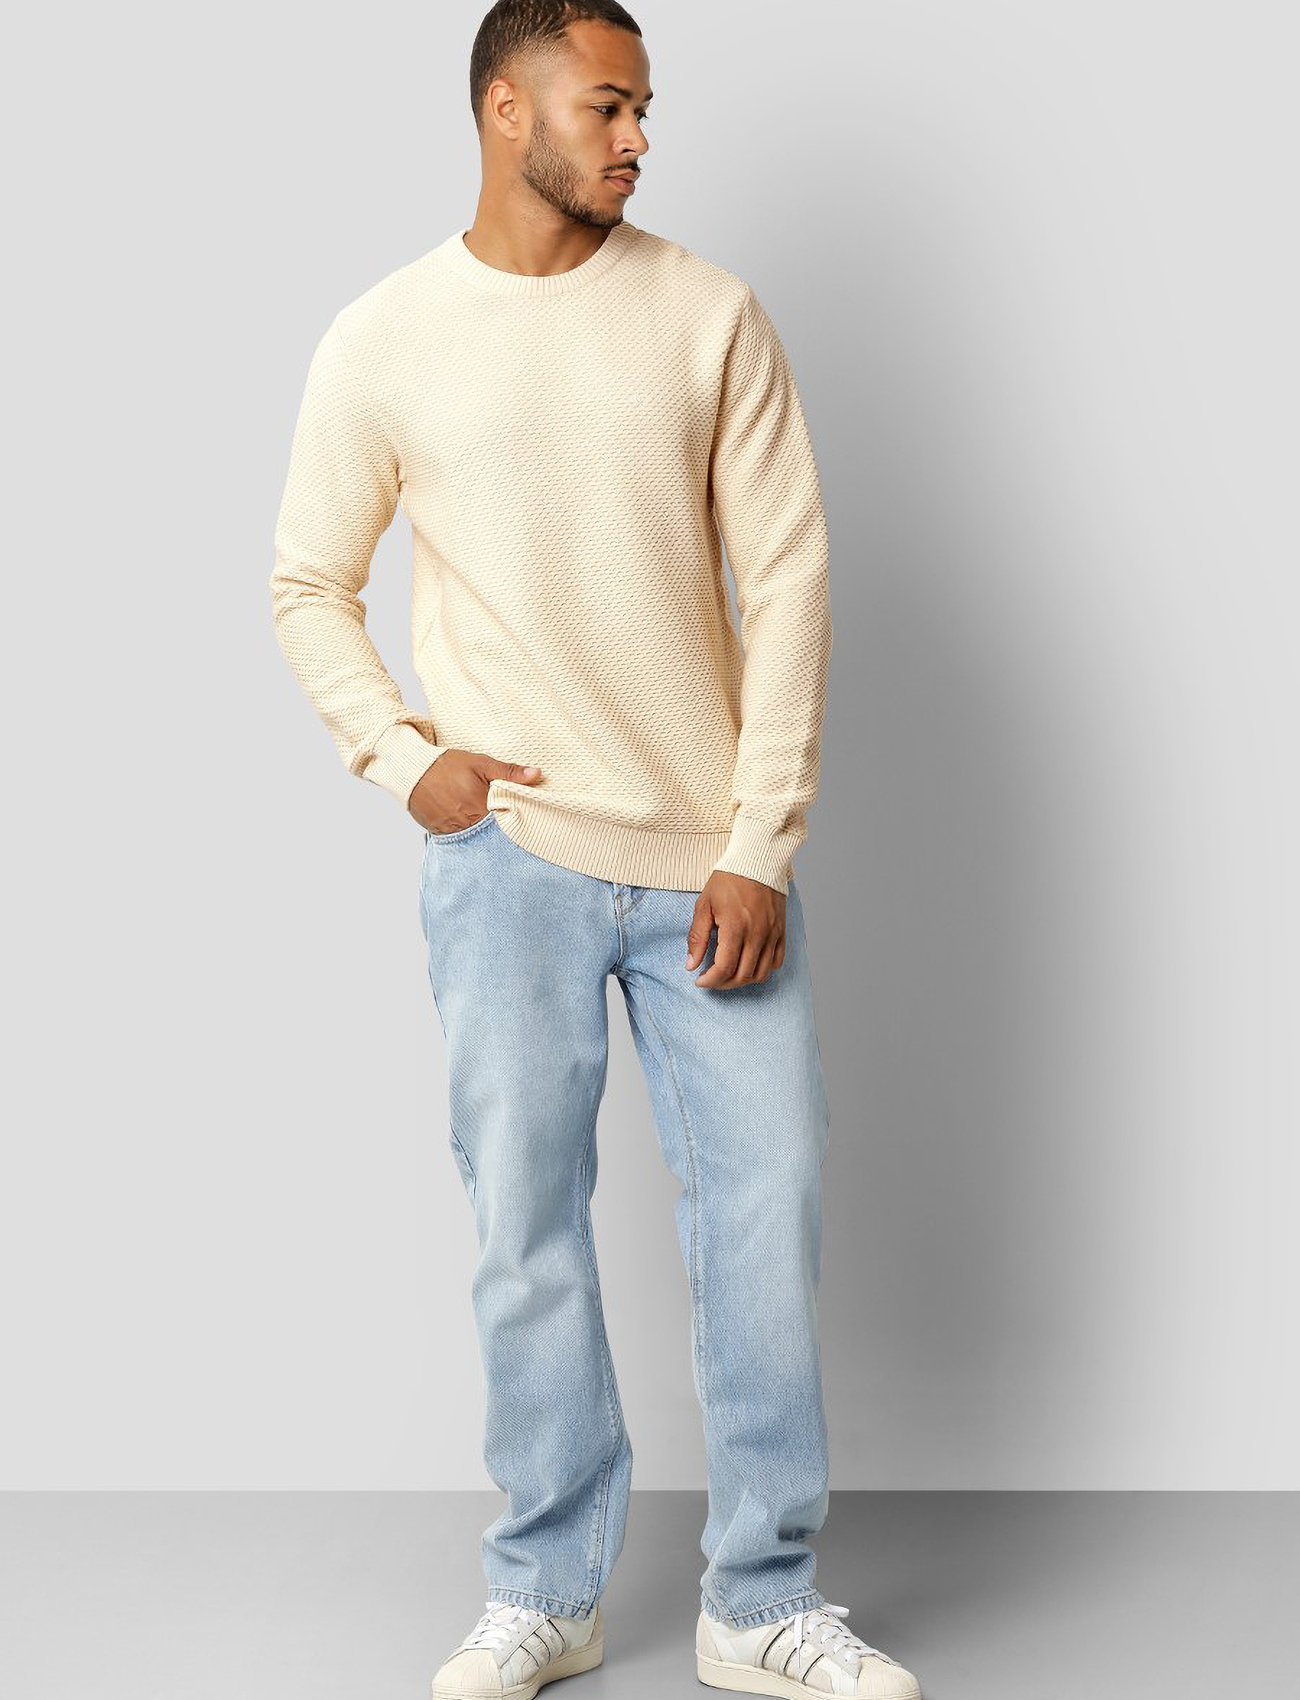 Clean Cut Copenhagen - Oliver Recycled O-neck Knit - rundhals - sand - 1